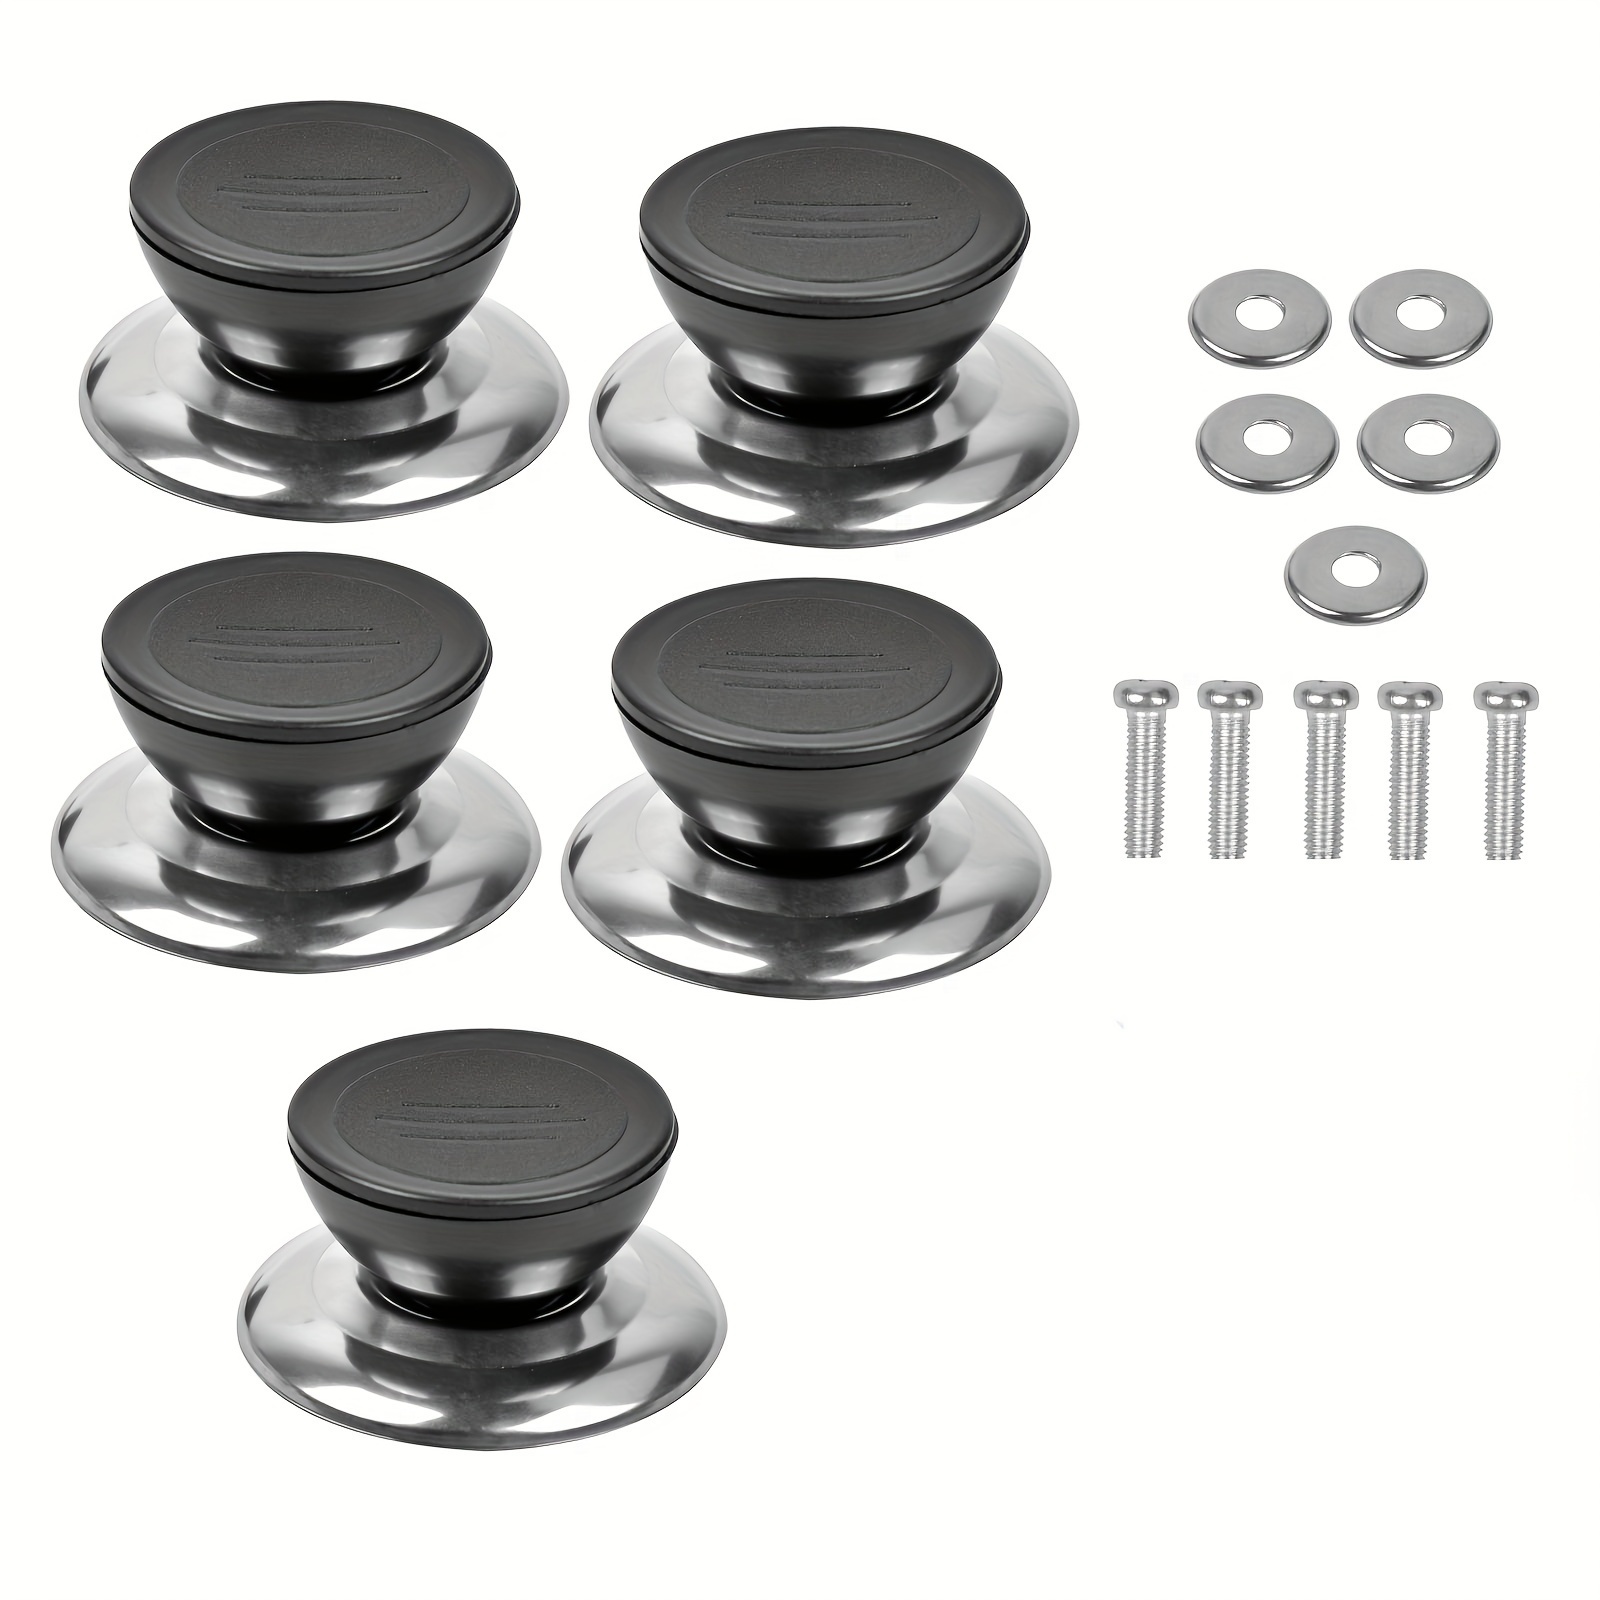 5pcs Universal Pot Lid Knobs Pot Lids Handle Heat-Resistant Cookware Black  Round Kitchen Replacement Handles With Screws And Nuts For Kitchen Pot Lid